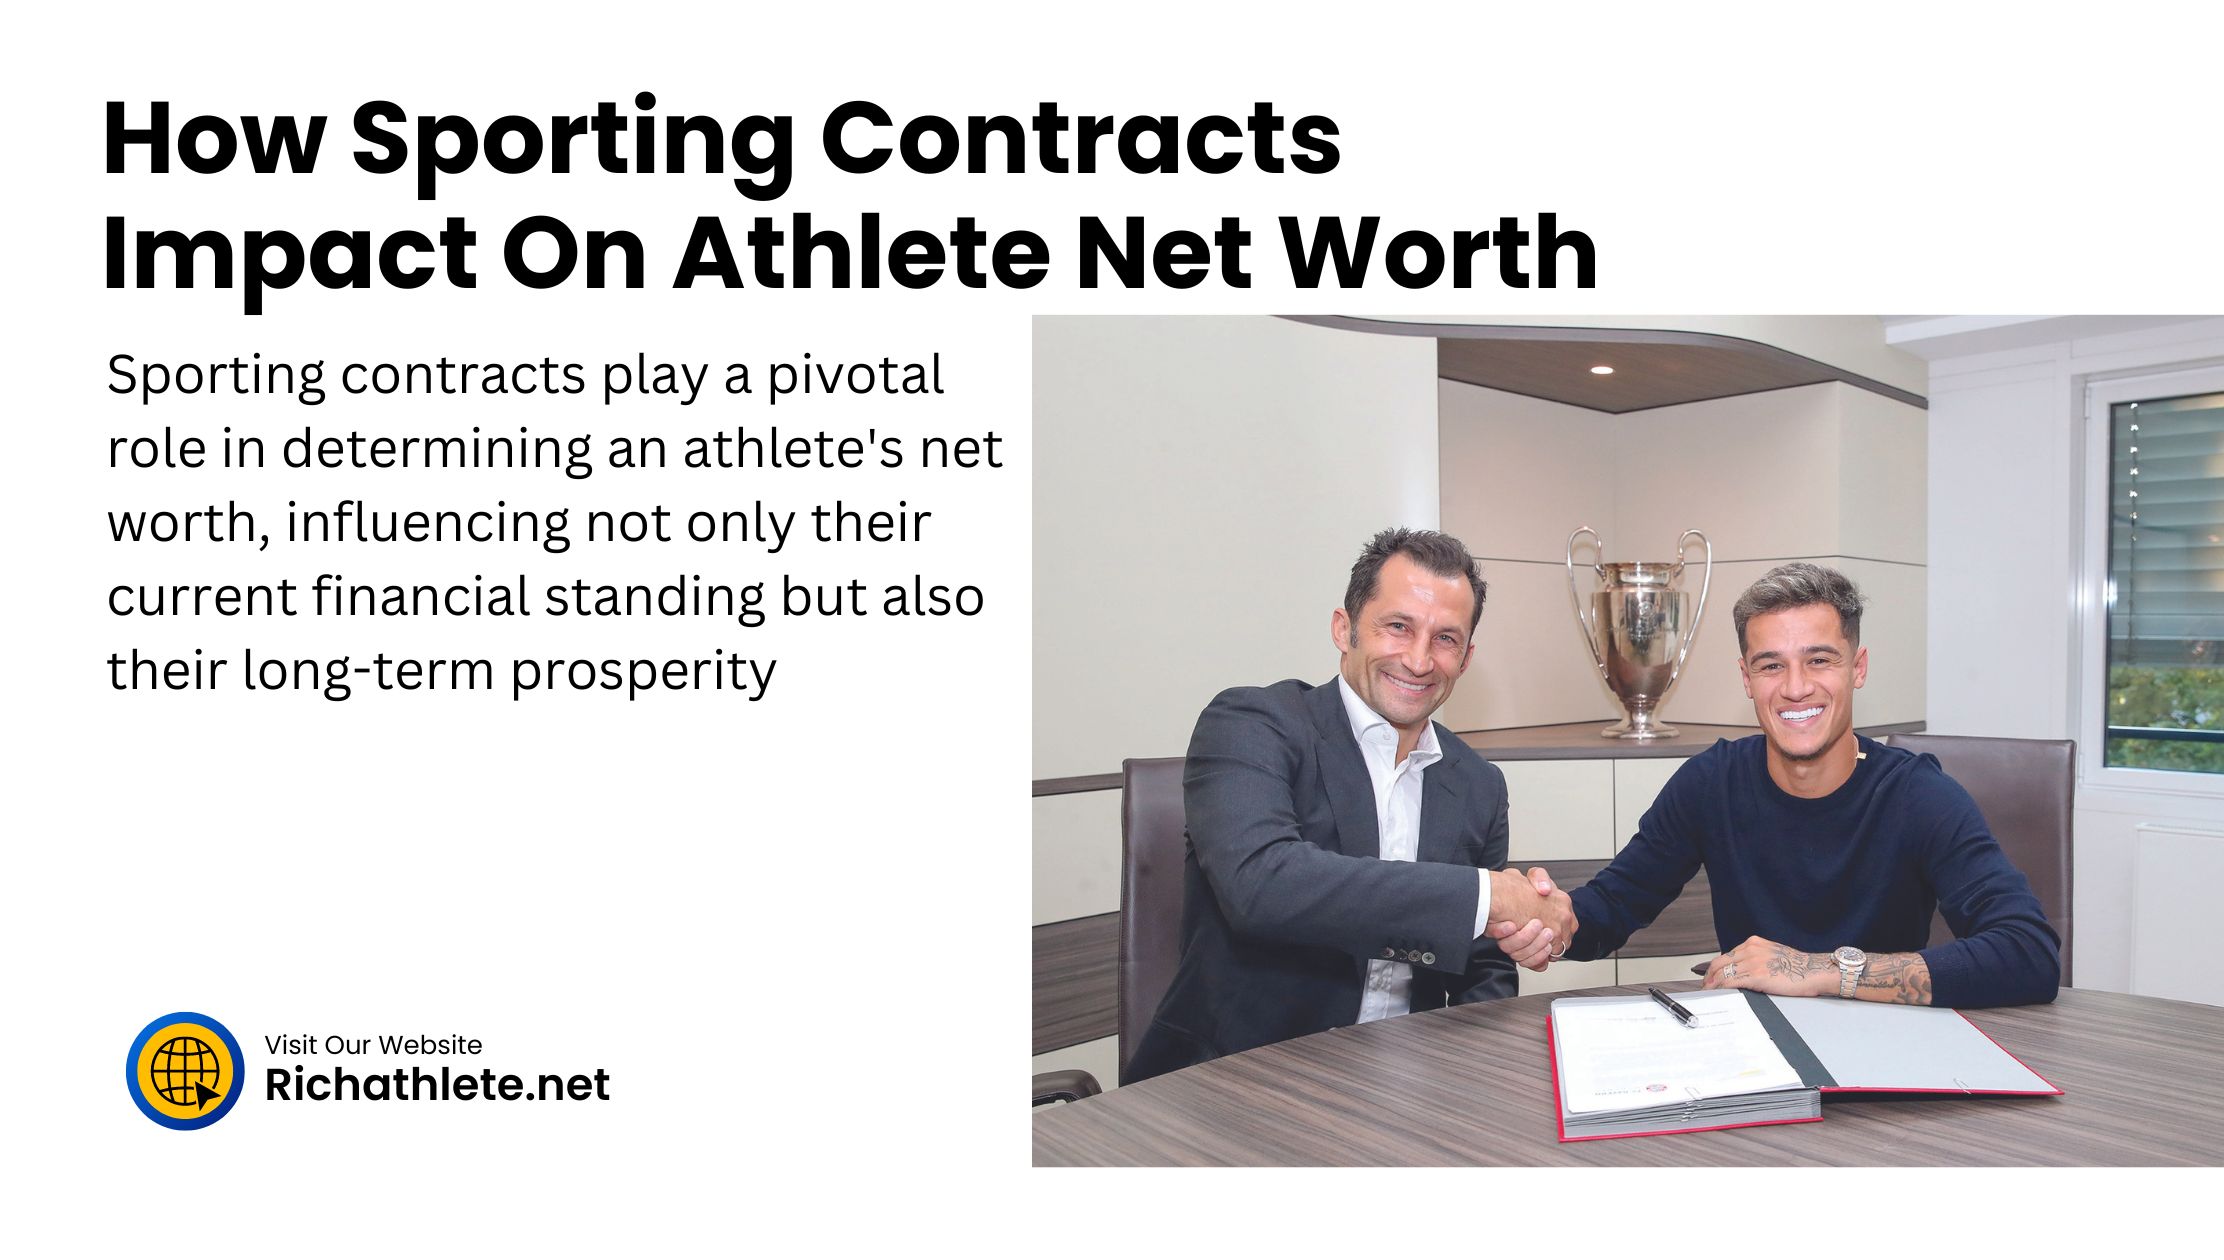 How Sporting Contracts Impact On Athlete Net Worth